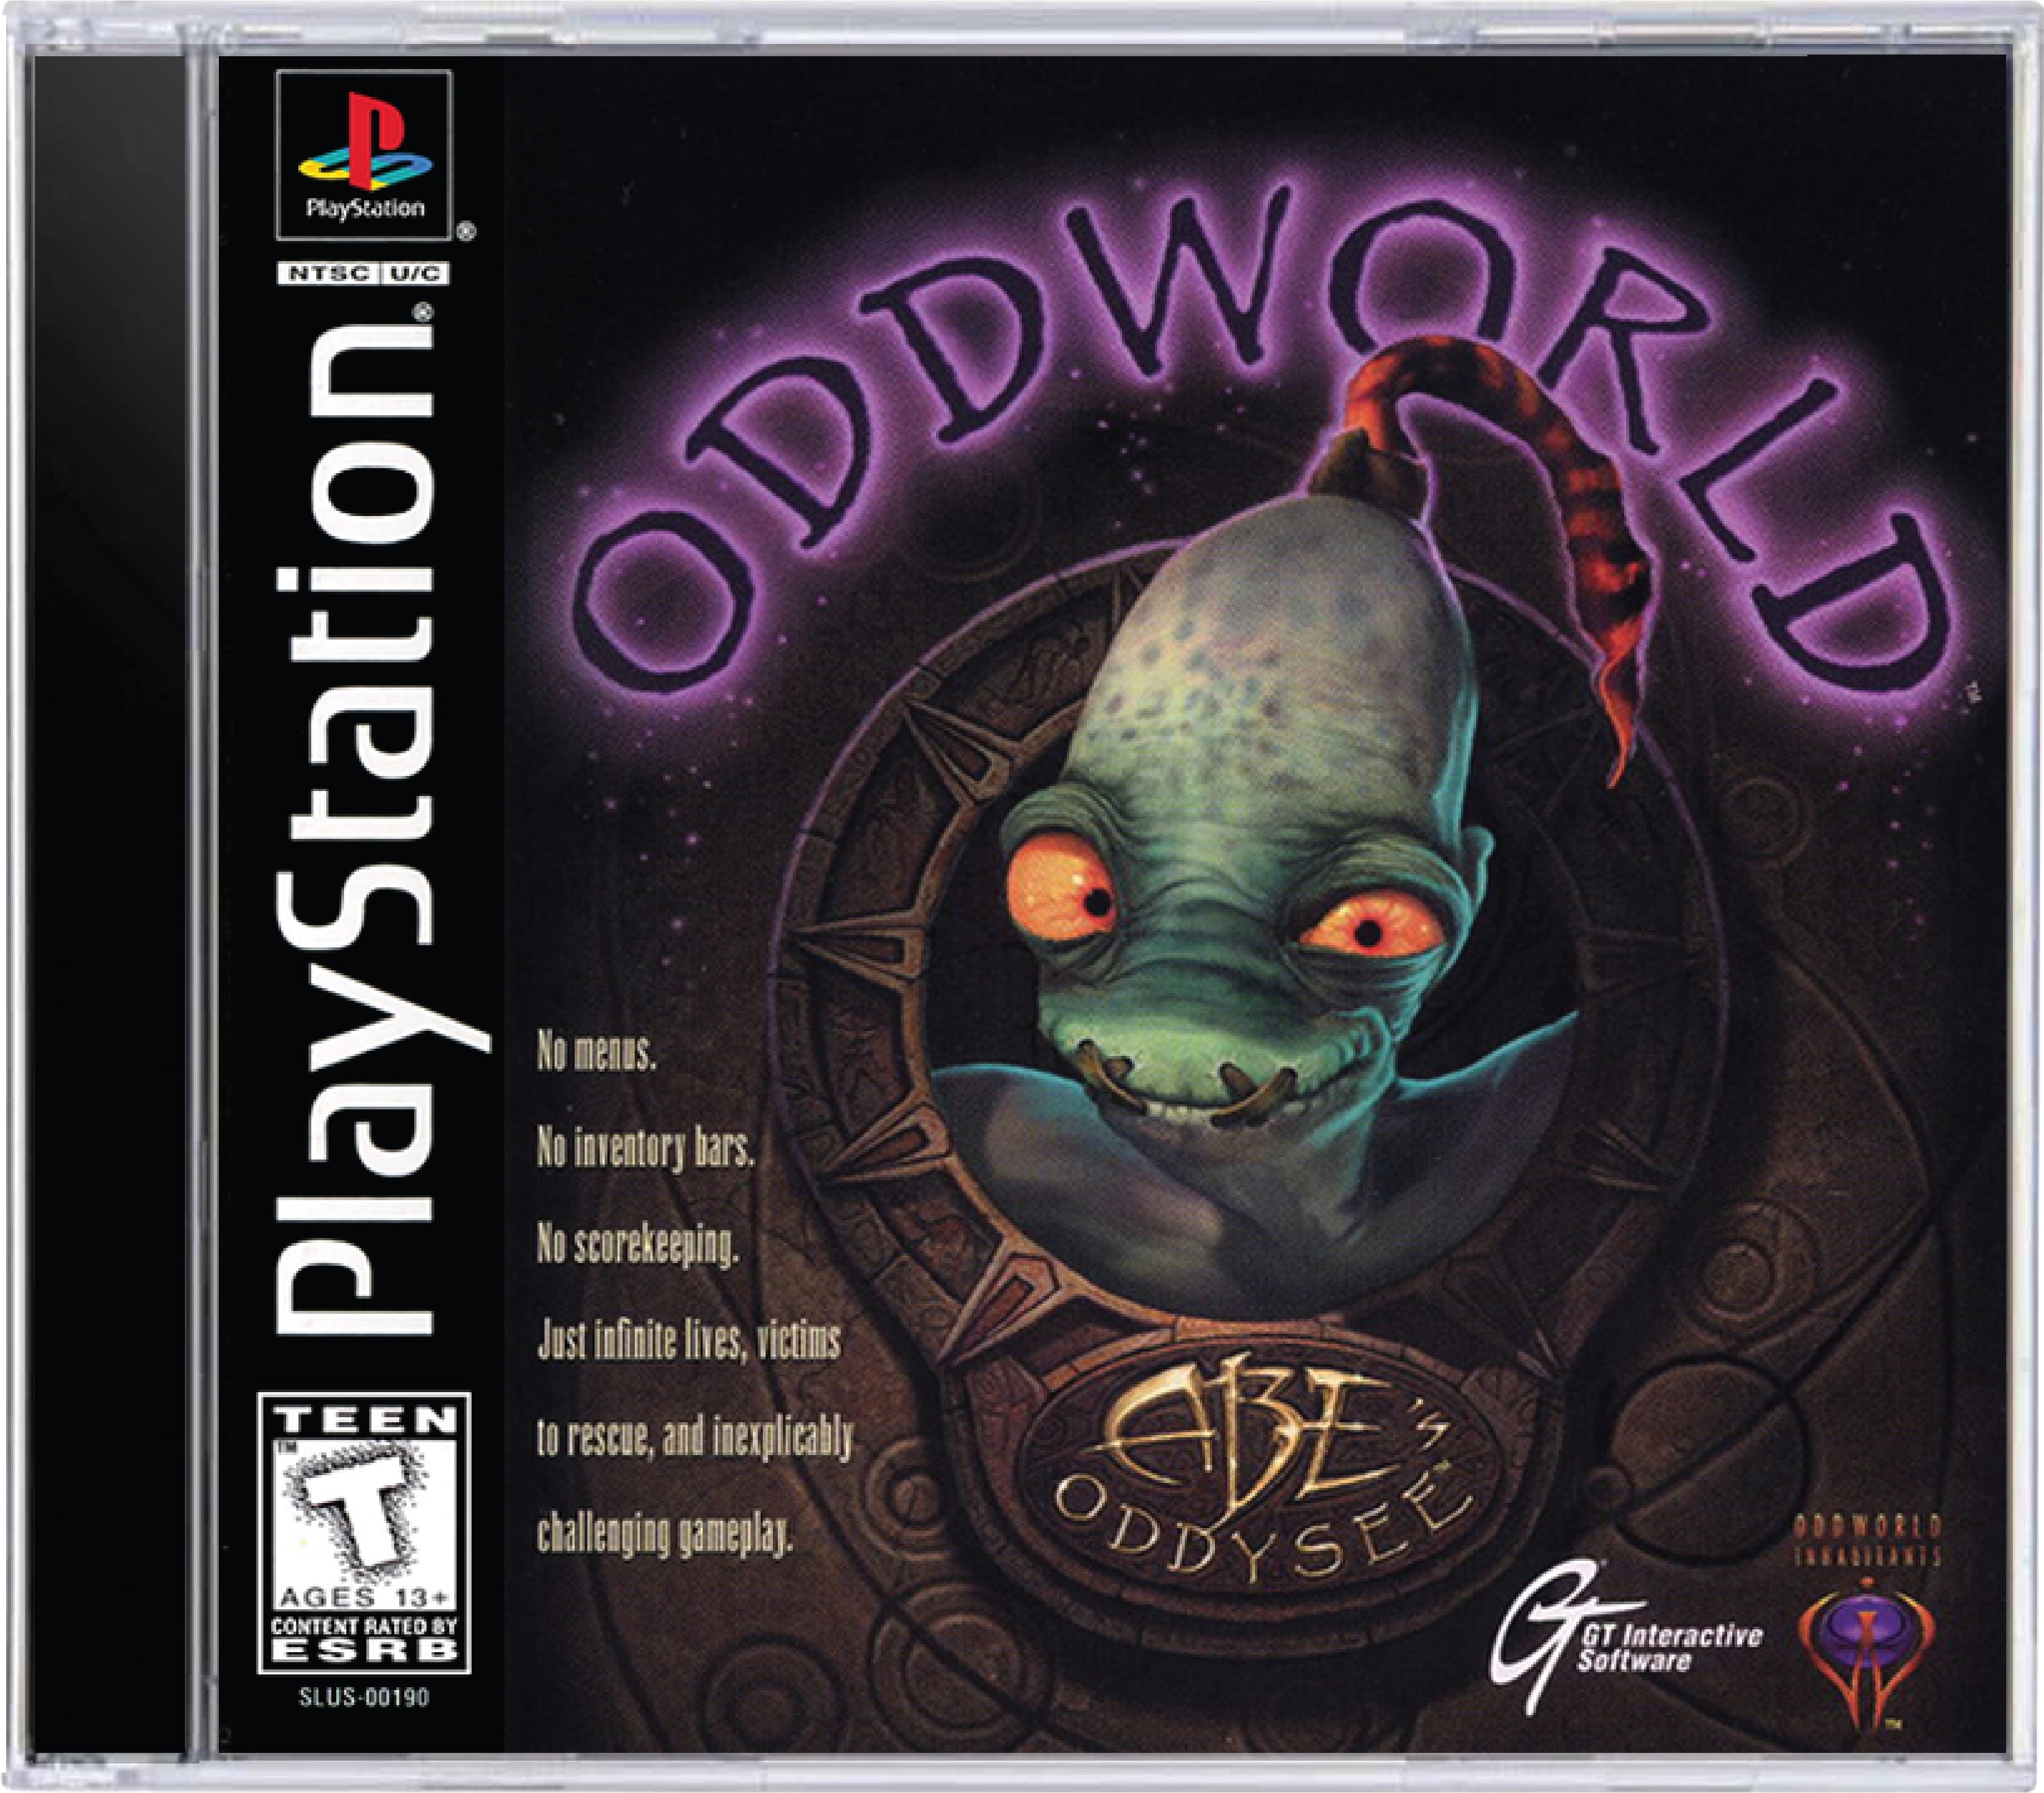 Oddworld Abe's Oddysee Cover Art and Product Photo